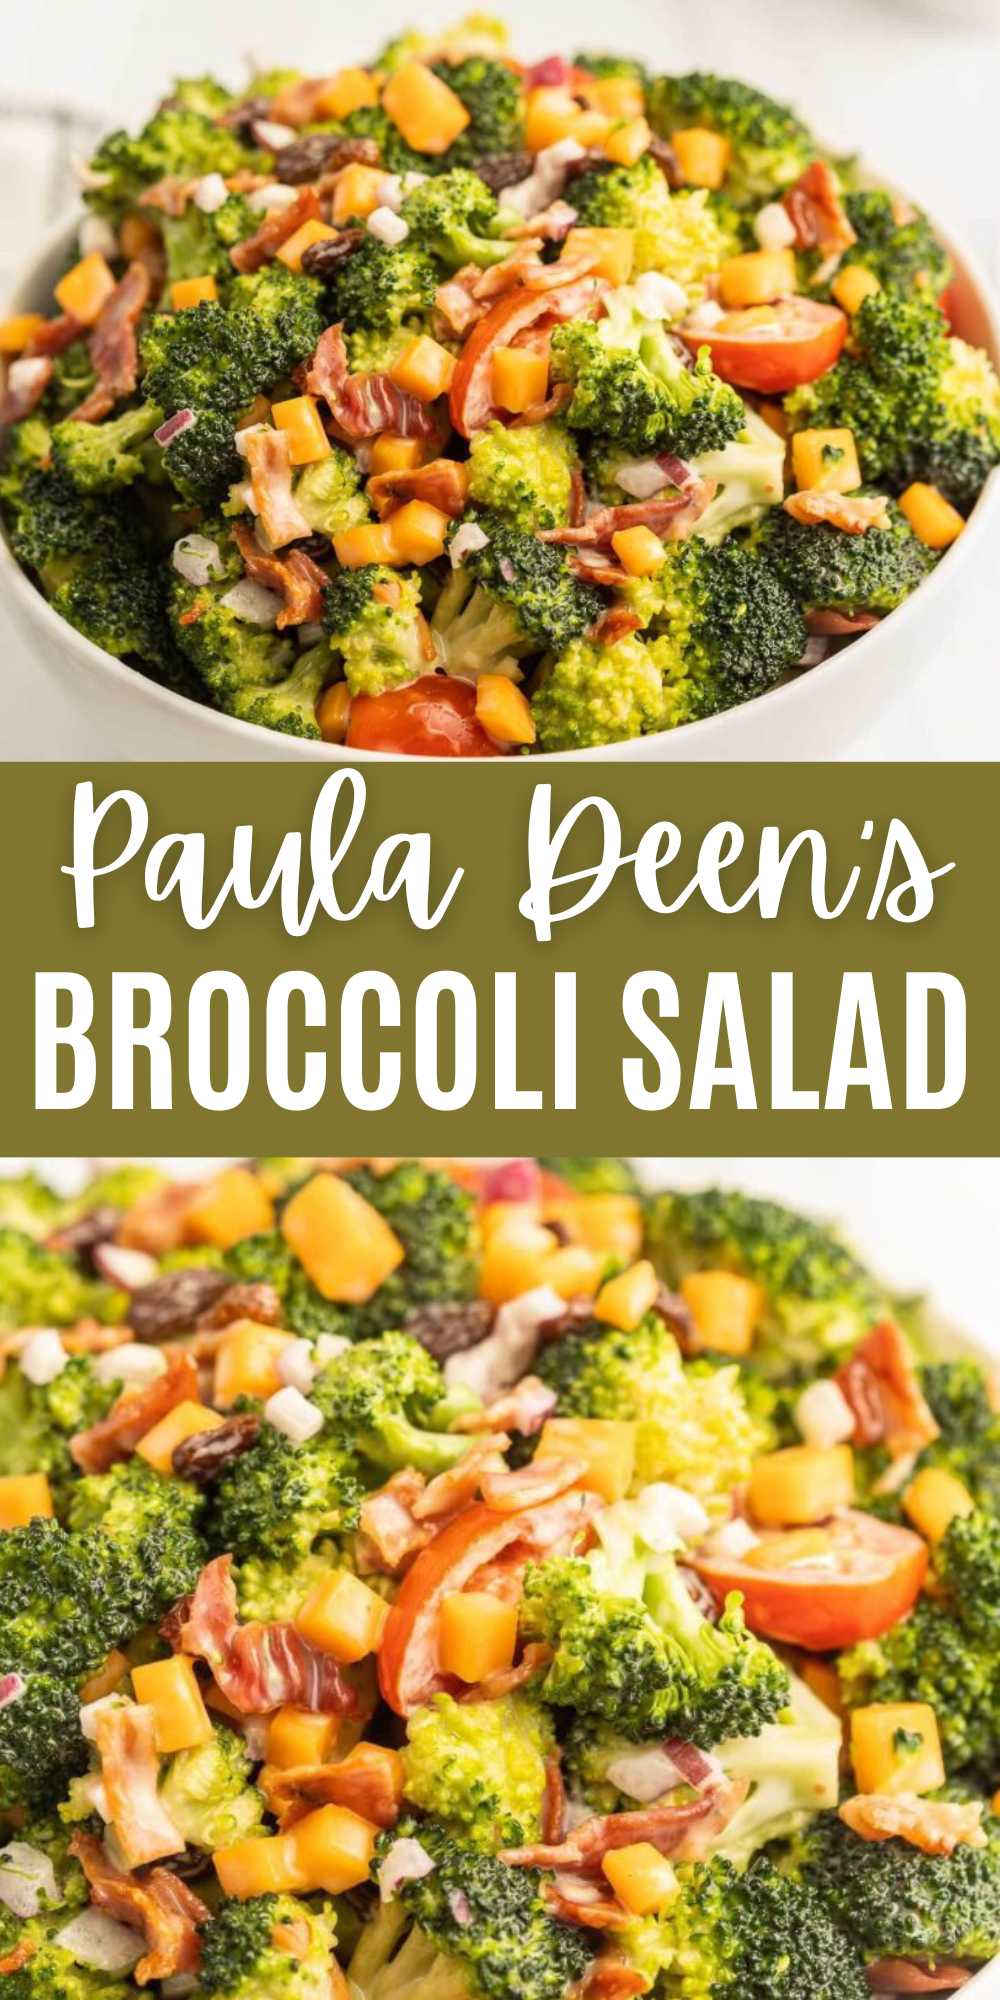 Paula Deen's Broccoli Salad is loaded with fresh vegetable and tossed in a creamy dressing. Make this tasty salad for all your summer BBQ's. If you are looking for a quick and easy summer salad, make this copycat broccoli salad. It is loaded with fresh ingredients and a made from scratch dressing. #eatingonadime #pauladeensbroccolisalad #broccolisalad